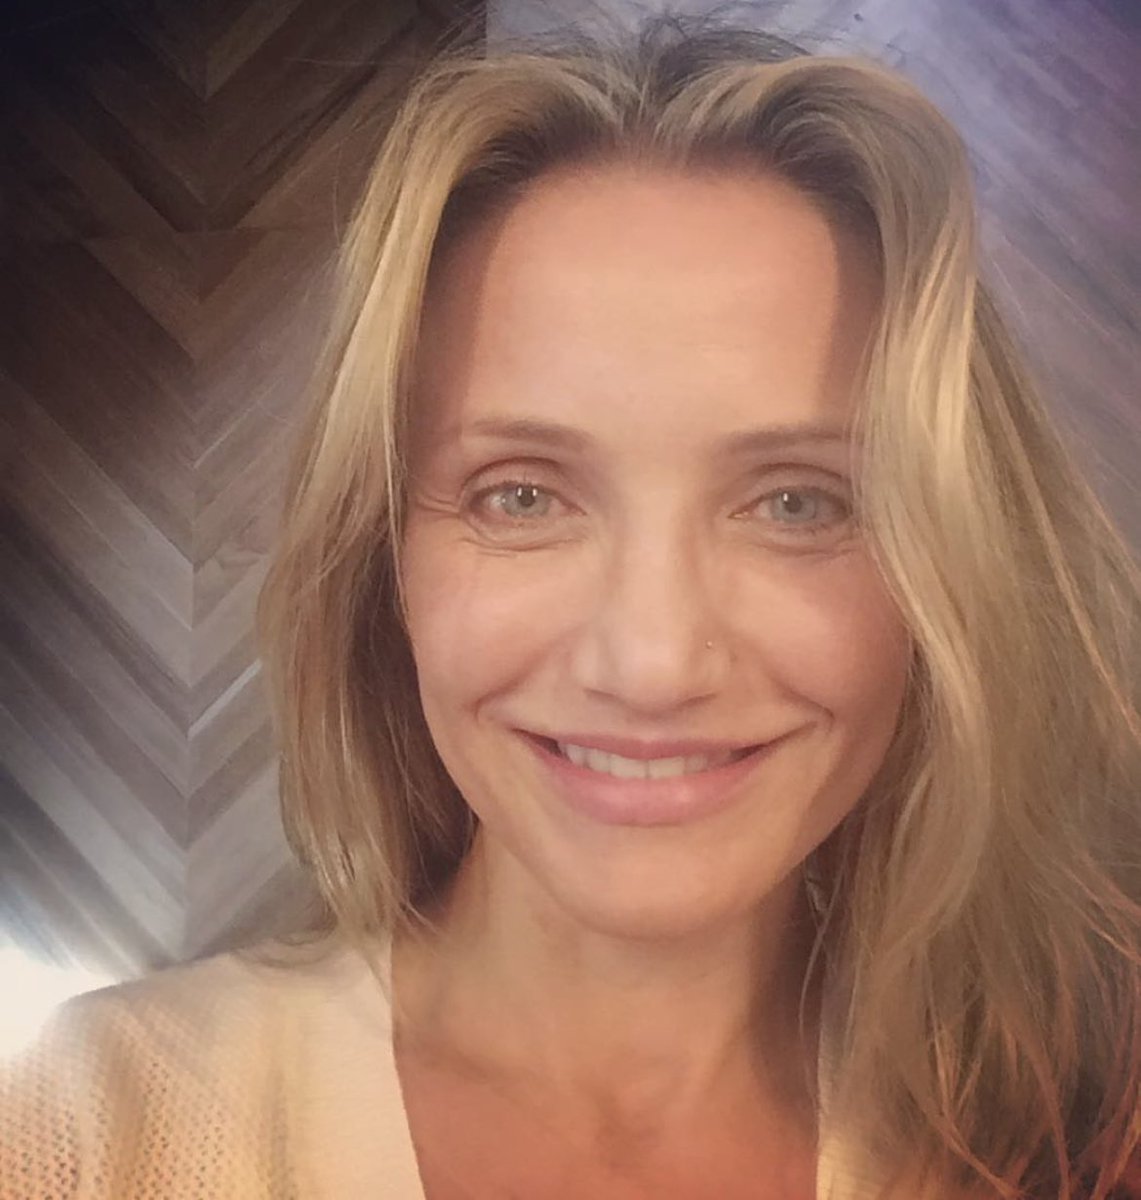 The naughty lady cameron diaz https://t.co/Tl7606MdVY